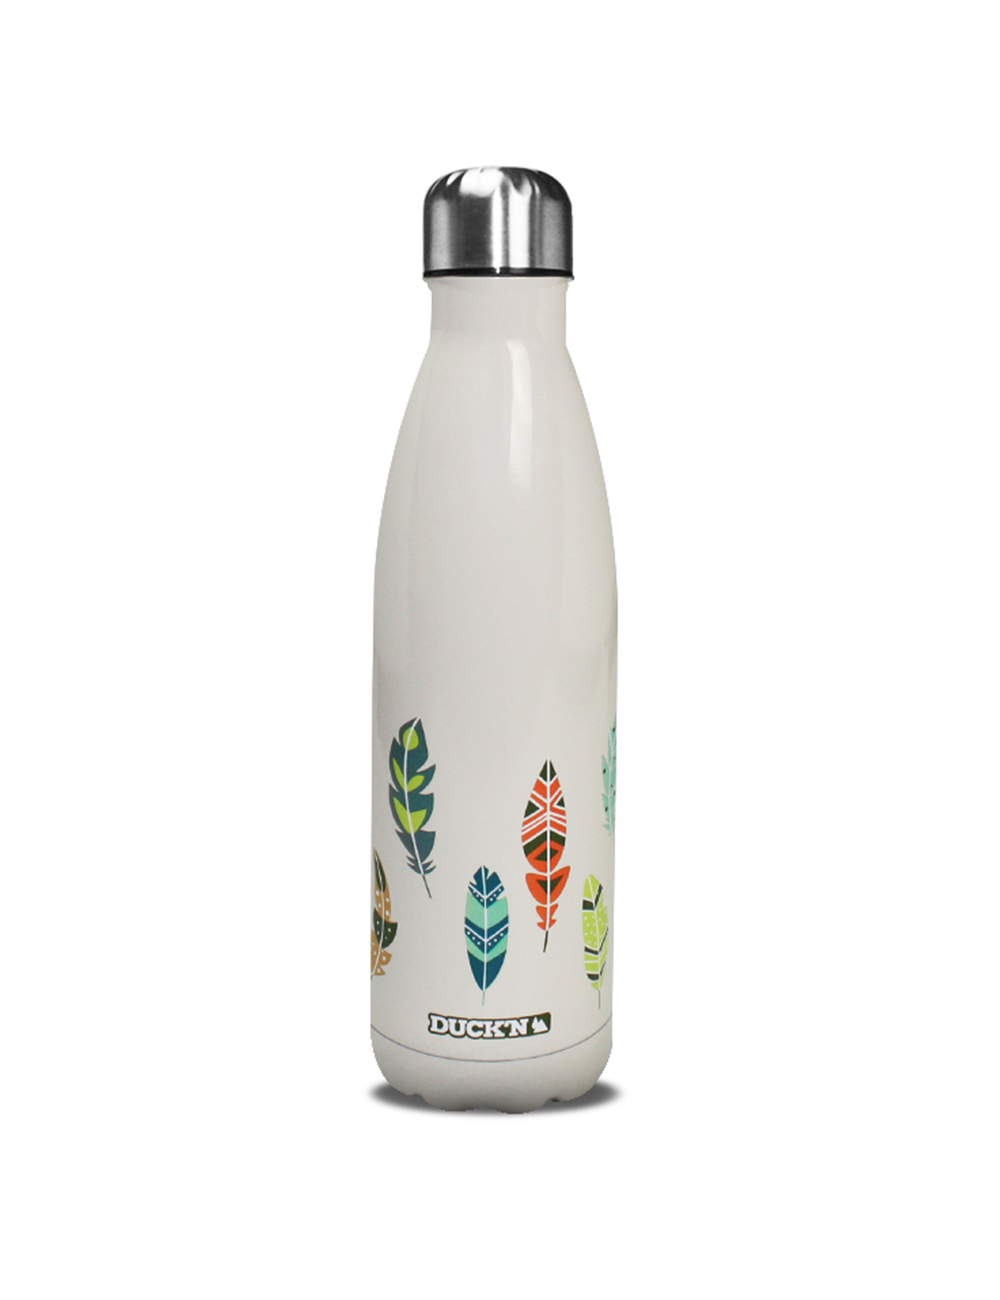 Bouteille Isotherme Taupe Duck'n 500ML Motifs plumes indiennes multicolores finition brillante